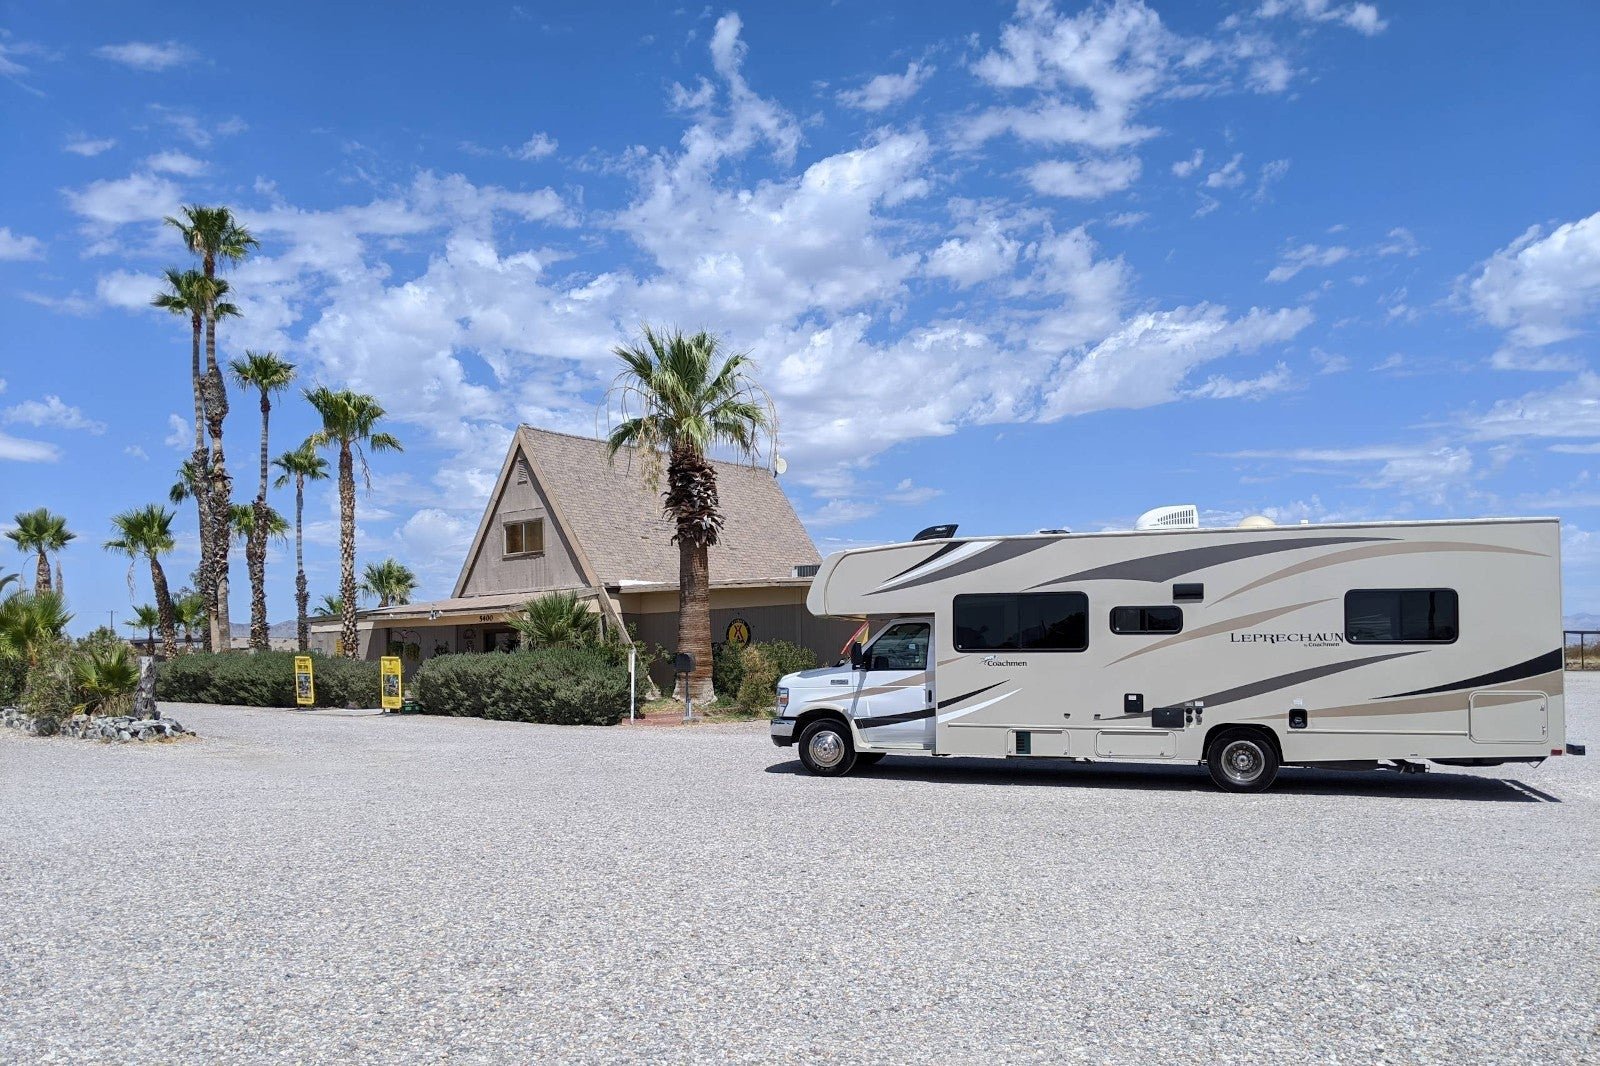 How to rent an RV for only $1 a day